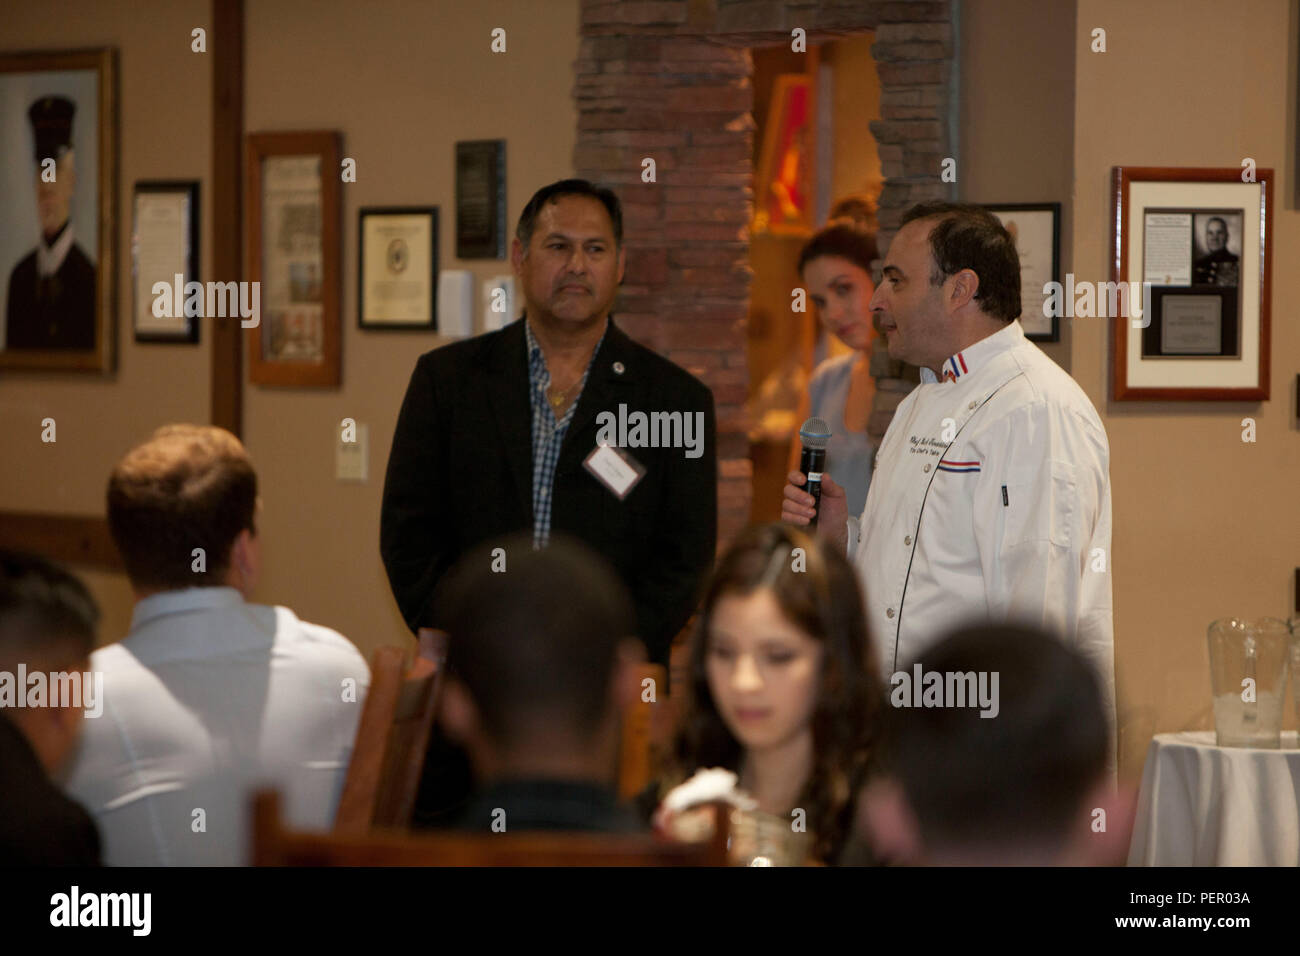 Mr. Paul Chapa (left), founder of Food Industry Feeding Heros (FISH), and celeberity chef Rick Tarantino (right) speak with honored guests prior to the start of the FISH dinner, at Iron Mike's lounge on Camp Pendleton, Calif., Jan 21, 2016. The event is hosted by Camp Pendleton and MCIWEST Commanding General, Brig. Gen. Edward Banta, and Mr. Paul Chapa to honor service members for their accomplishments and sacrifices. (U.S. Marine Corps photo by Cpl. Brian Bekkala/MCIWEST-MCB CamPen Combat Camera/Released) Stock Photo